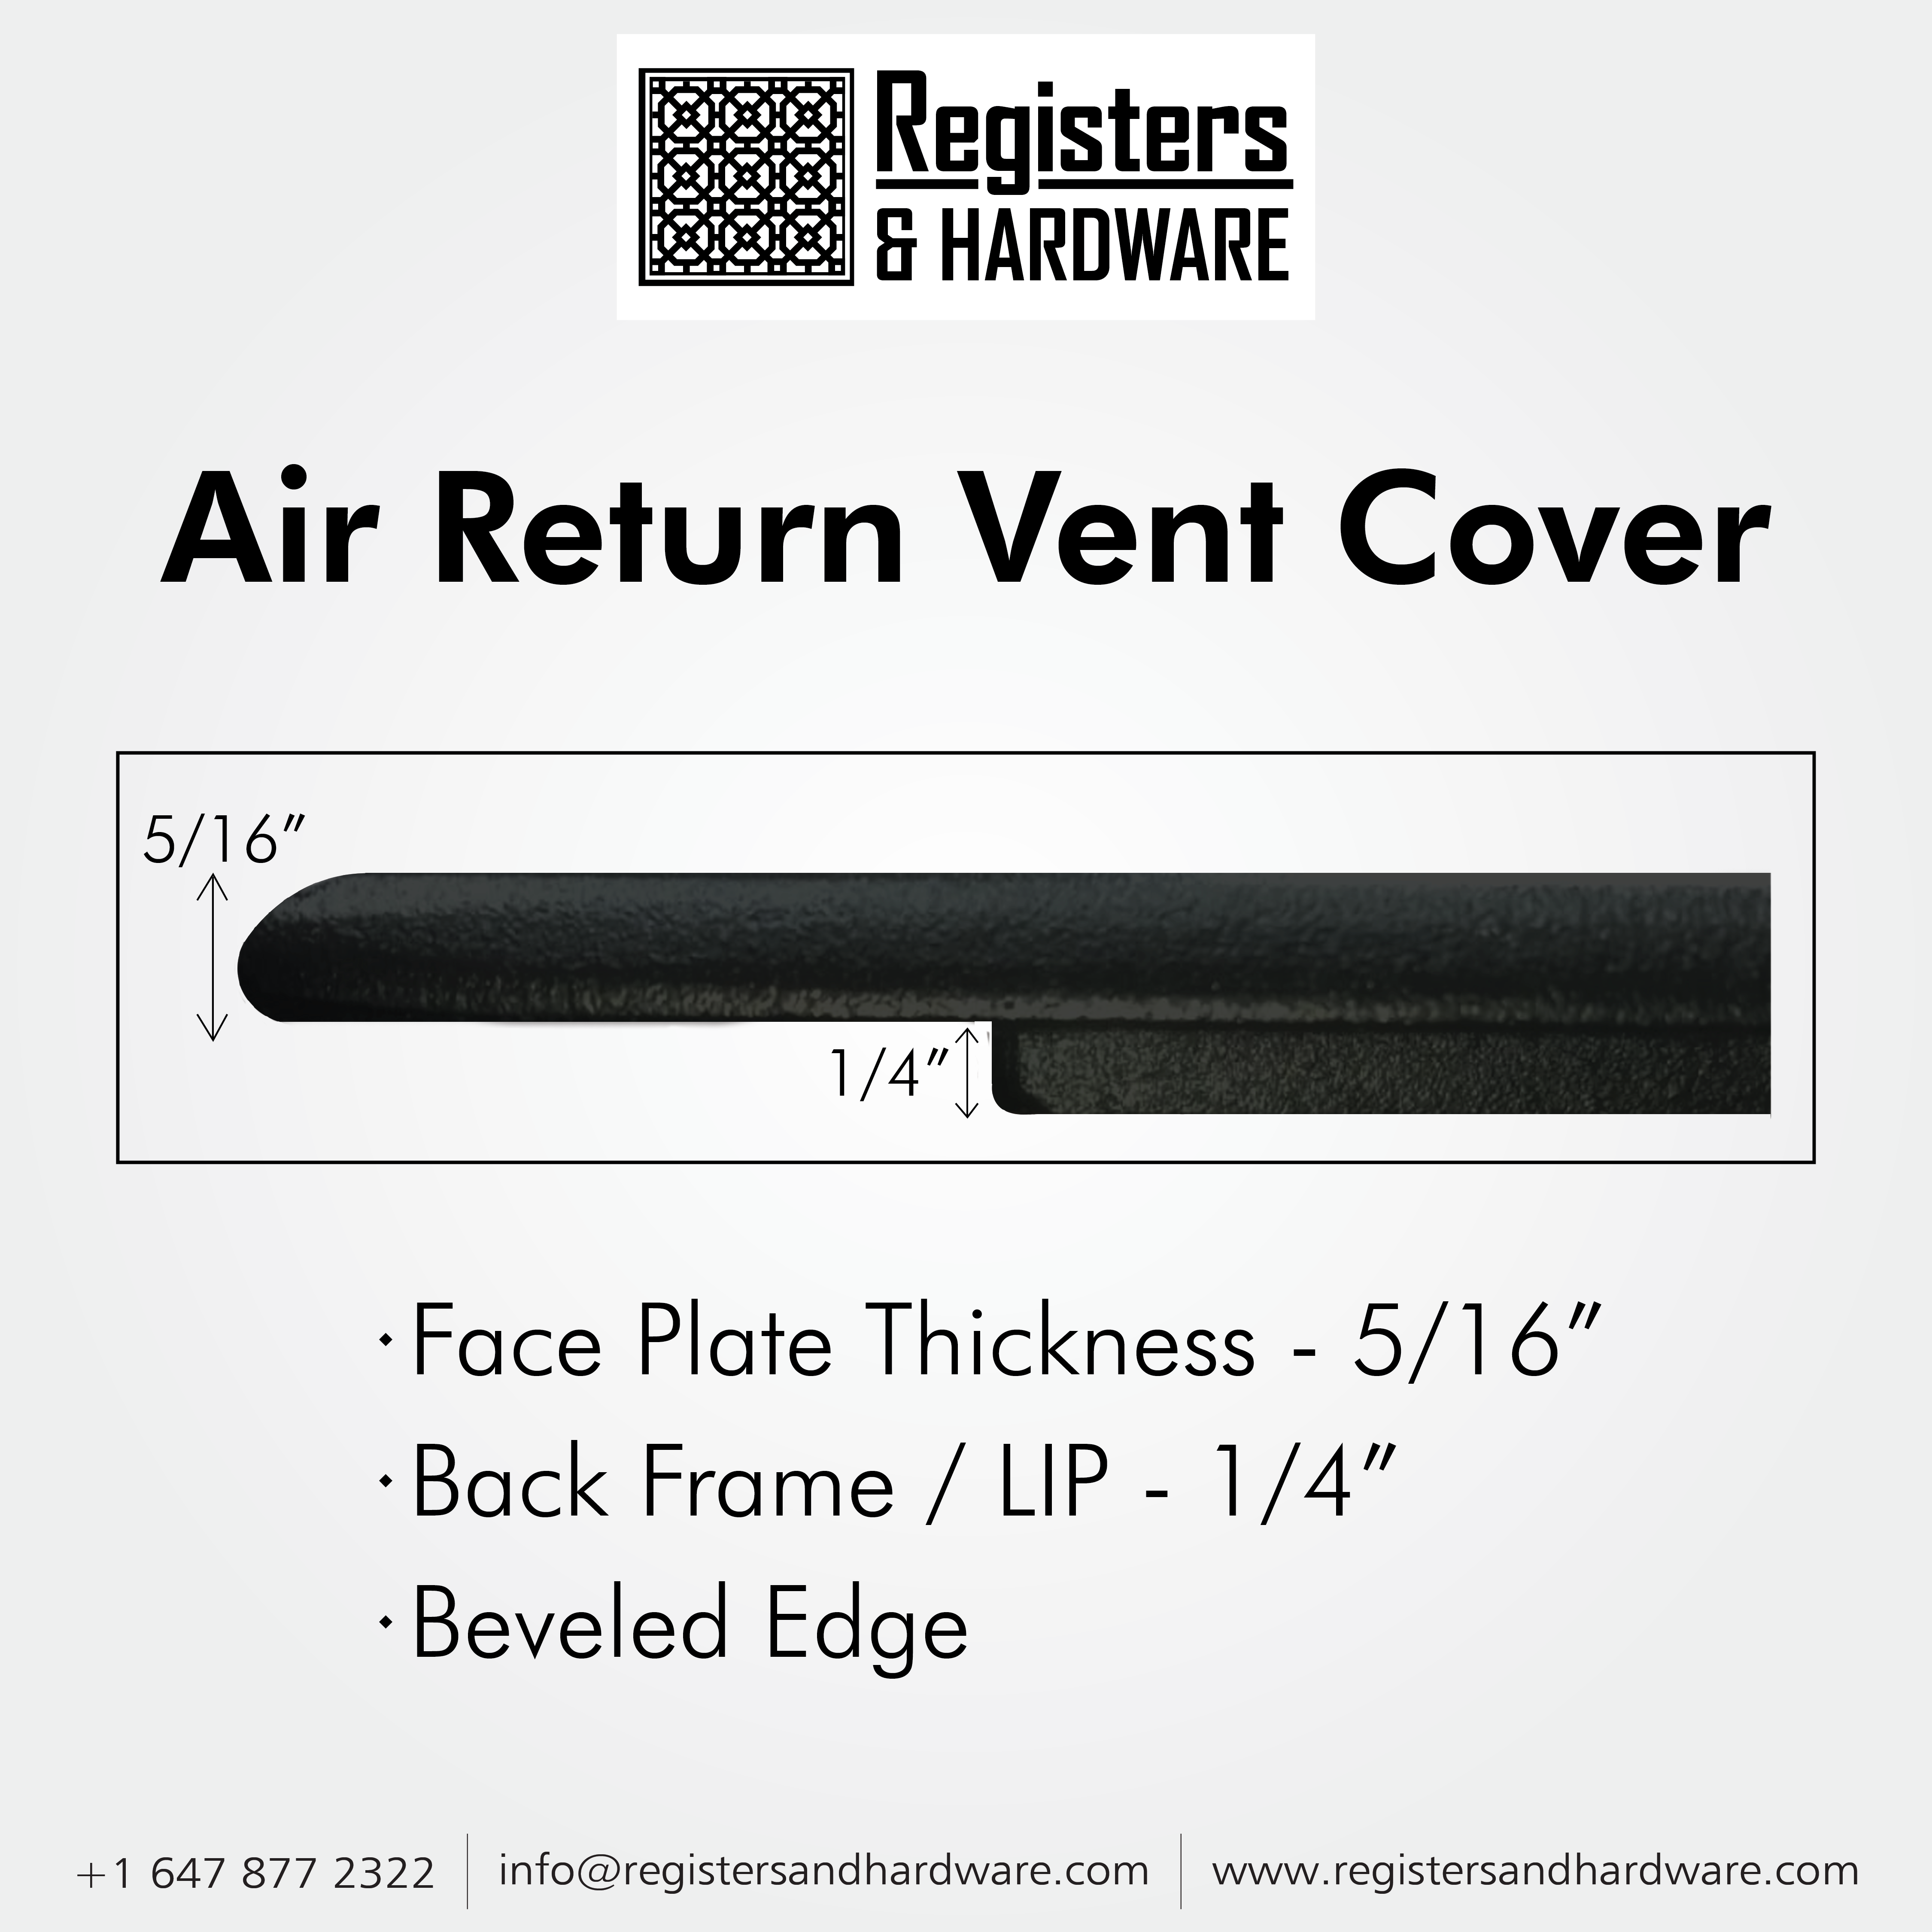 Achtek AIR RETURN 26"x30" Duct Opening (Overall Size 28"x32") | Heavy Cast Aluminum Air Grille HVAC Duct || Powder Coated